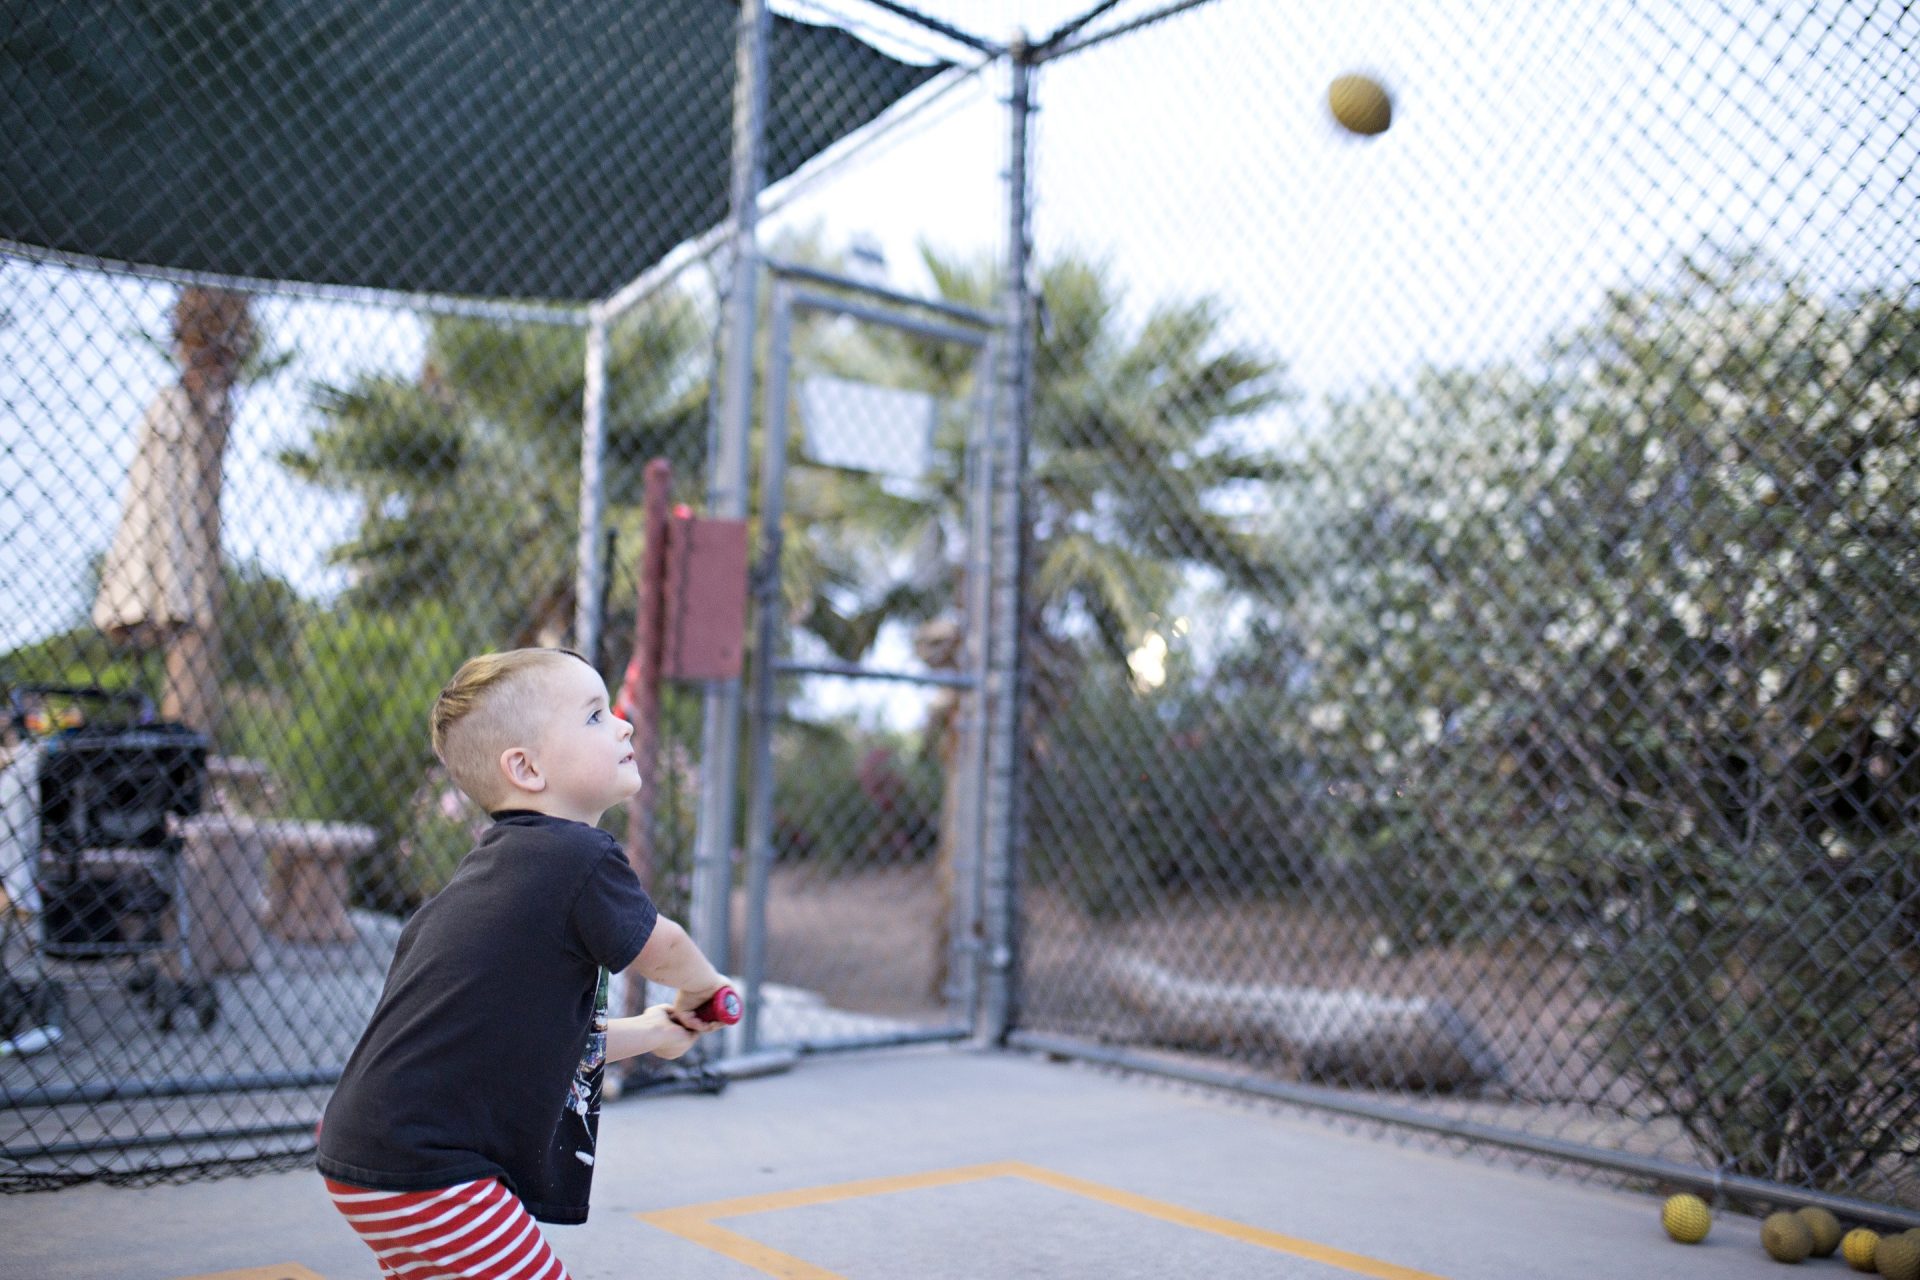 Kids playing softball: Why it's important for them to stay active